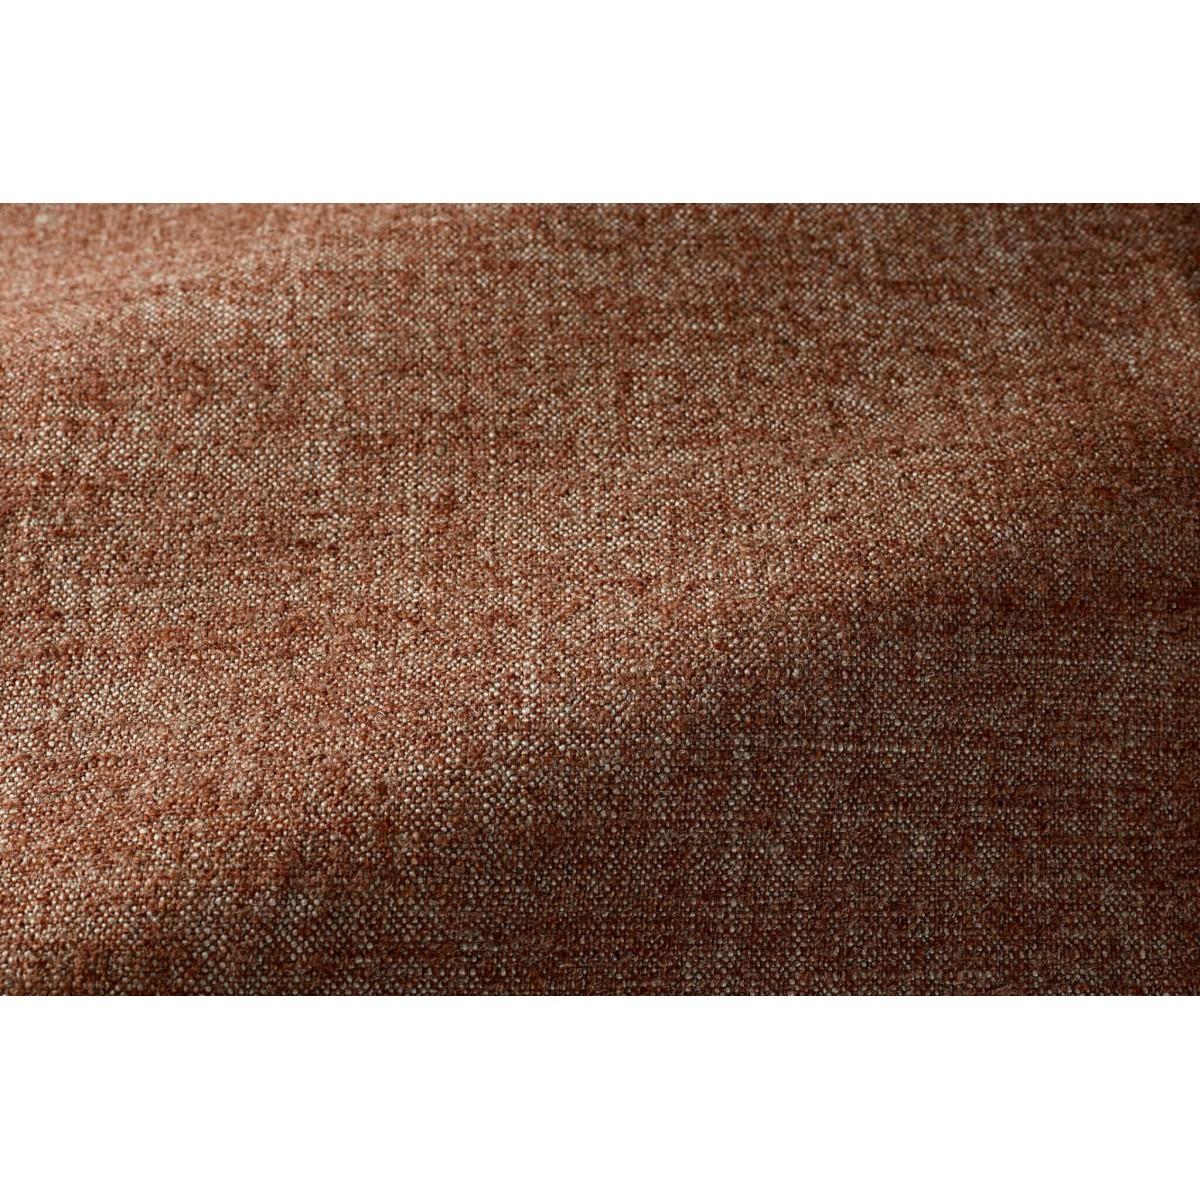 Popus Editions Giovanna 2.5 seater sofa in Terracotta London Linen Fabric

Giovanna is a sofa with a strong profile. A sober, plush line, with this famous detail that changes everything, so as not to forget its strength of character and this